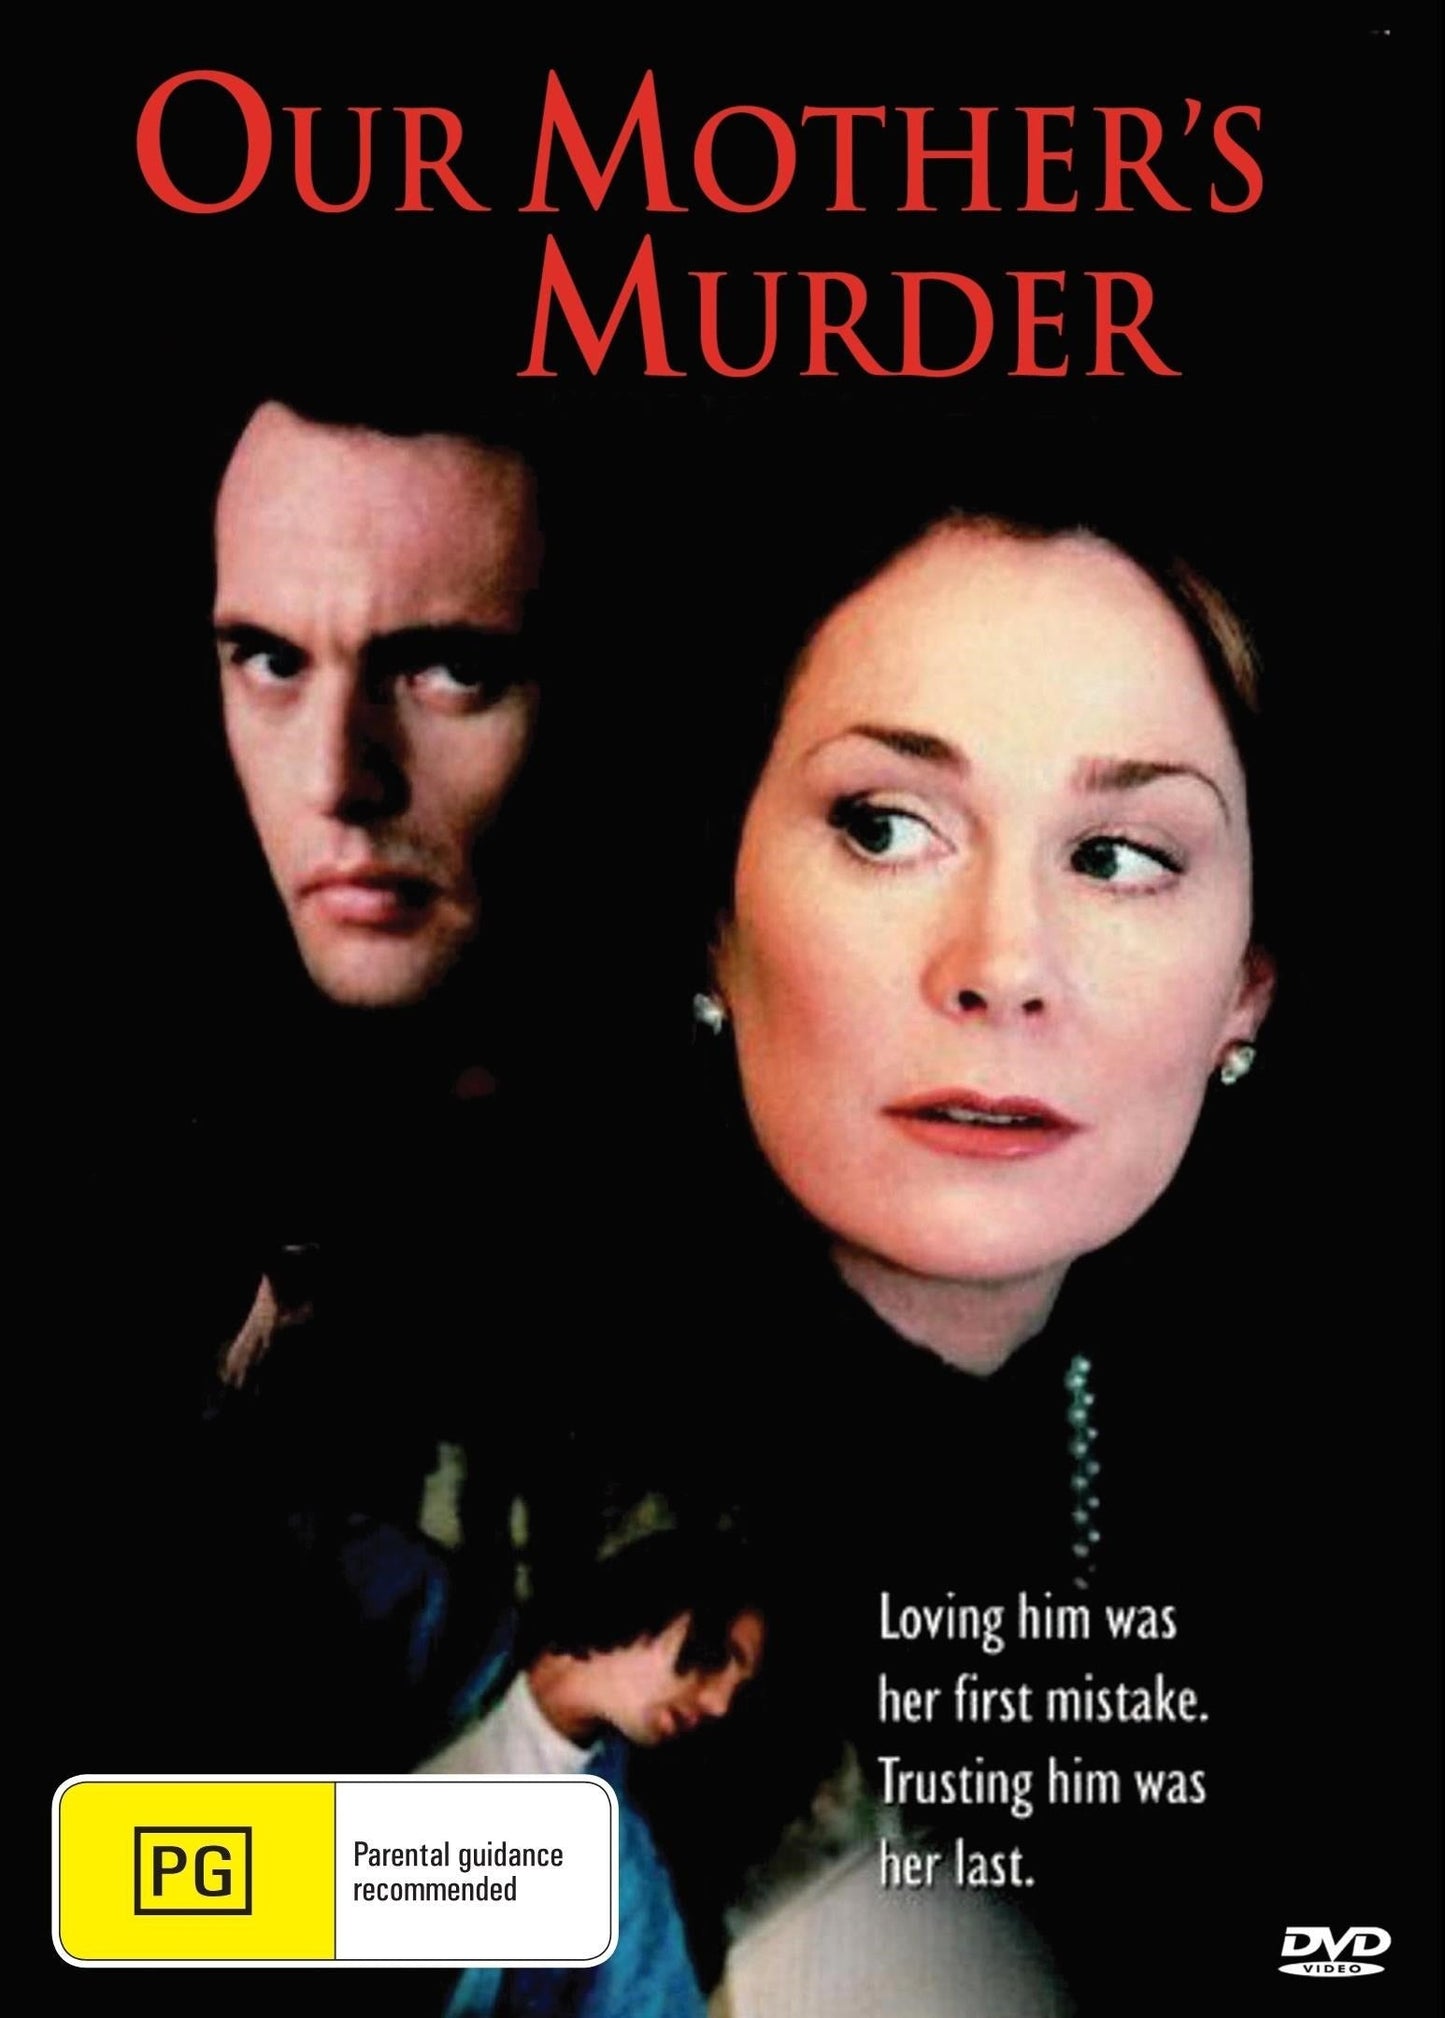 Our Mother's Murder rareandcollectibledvds